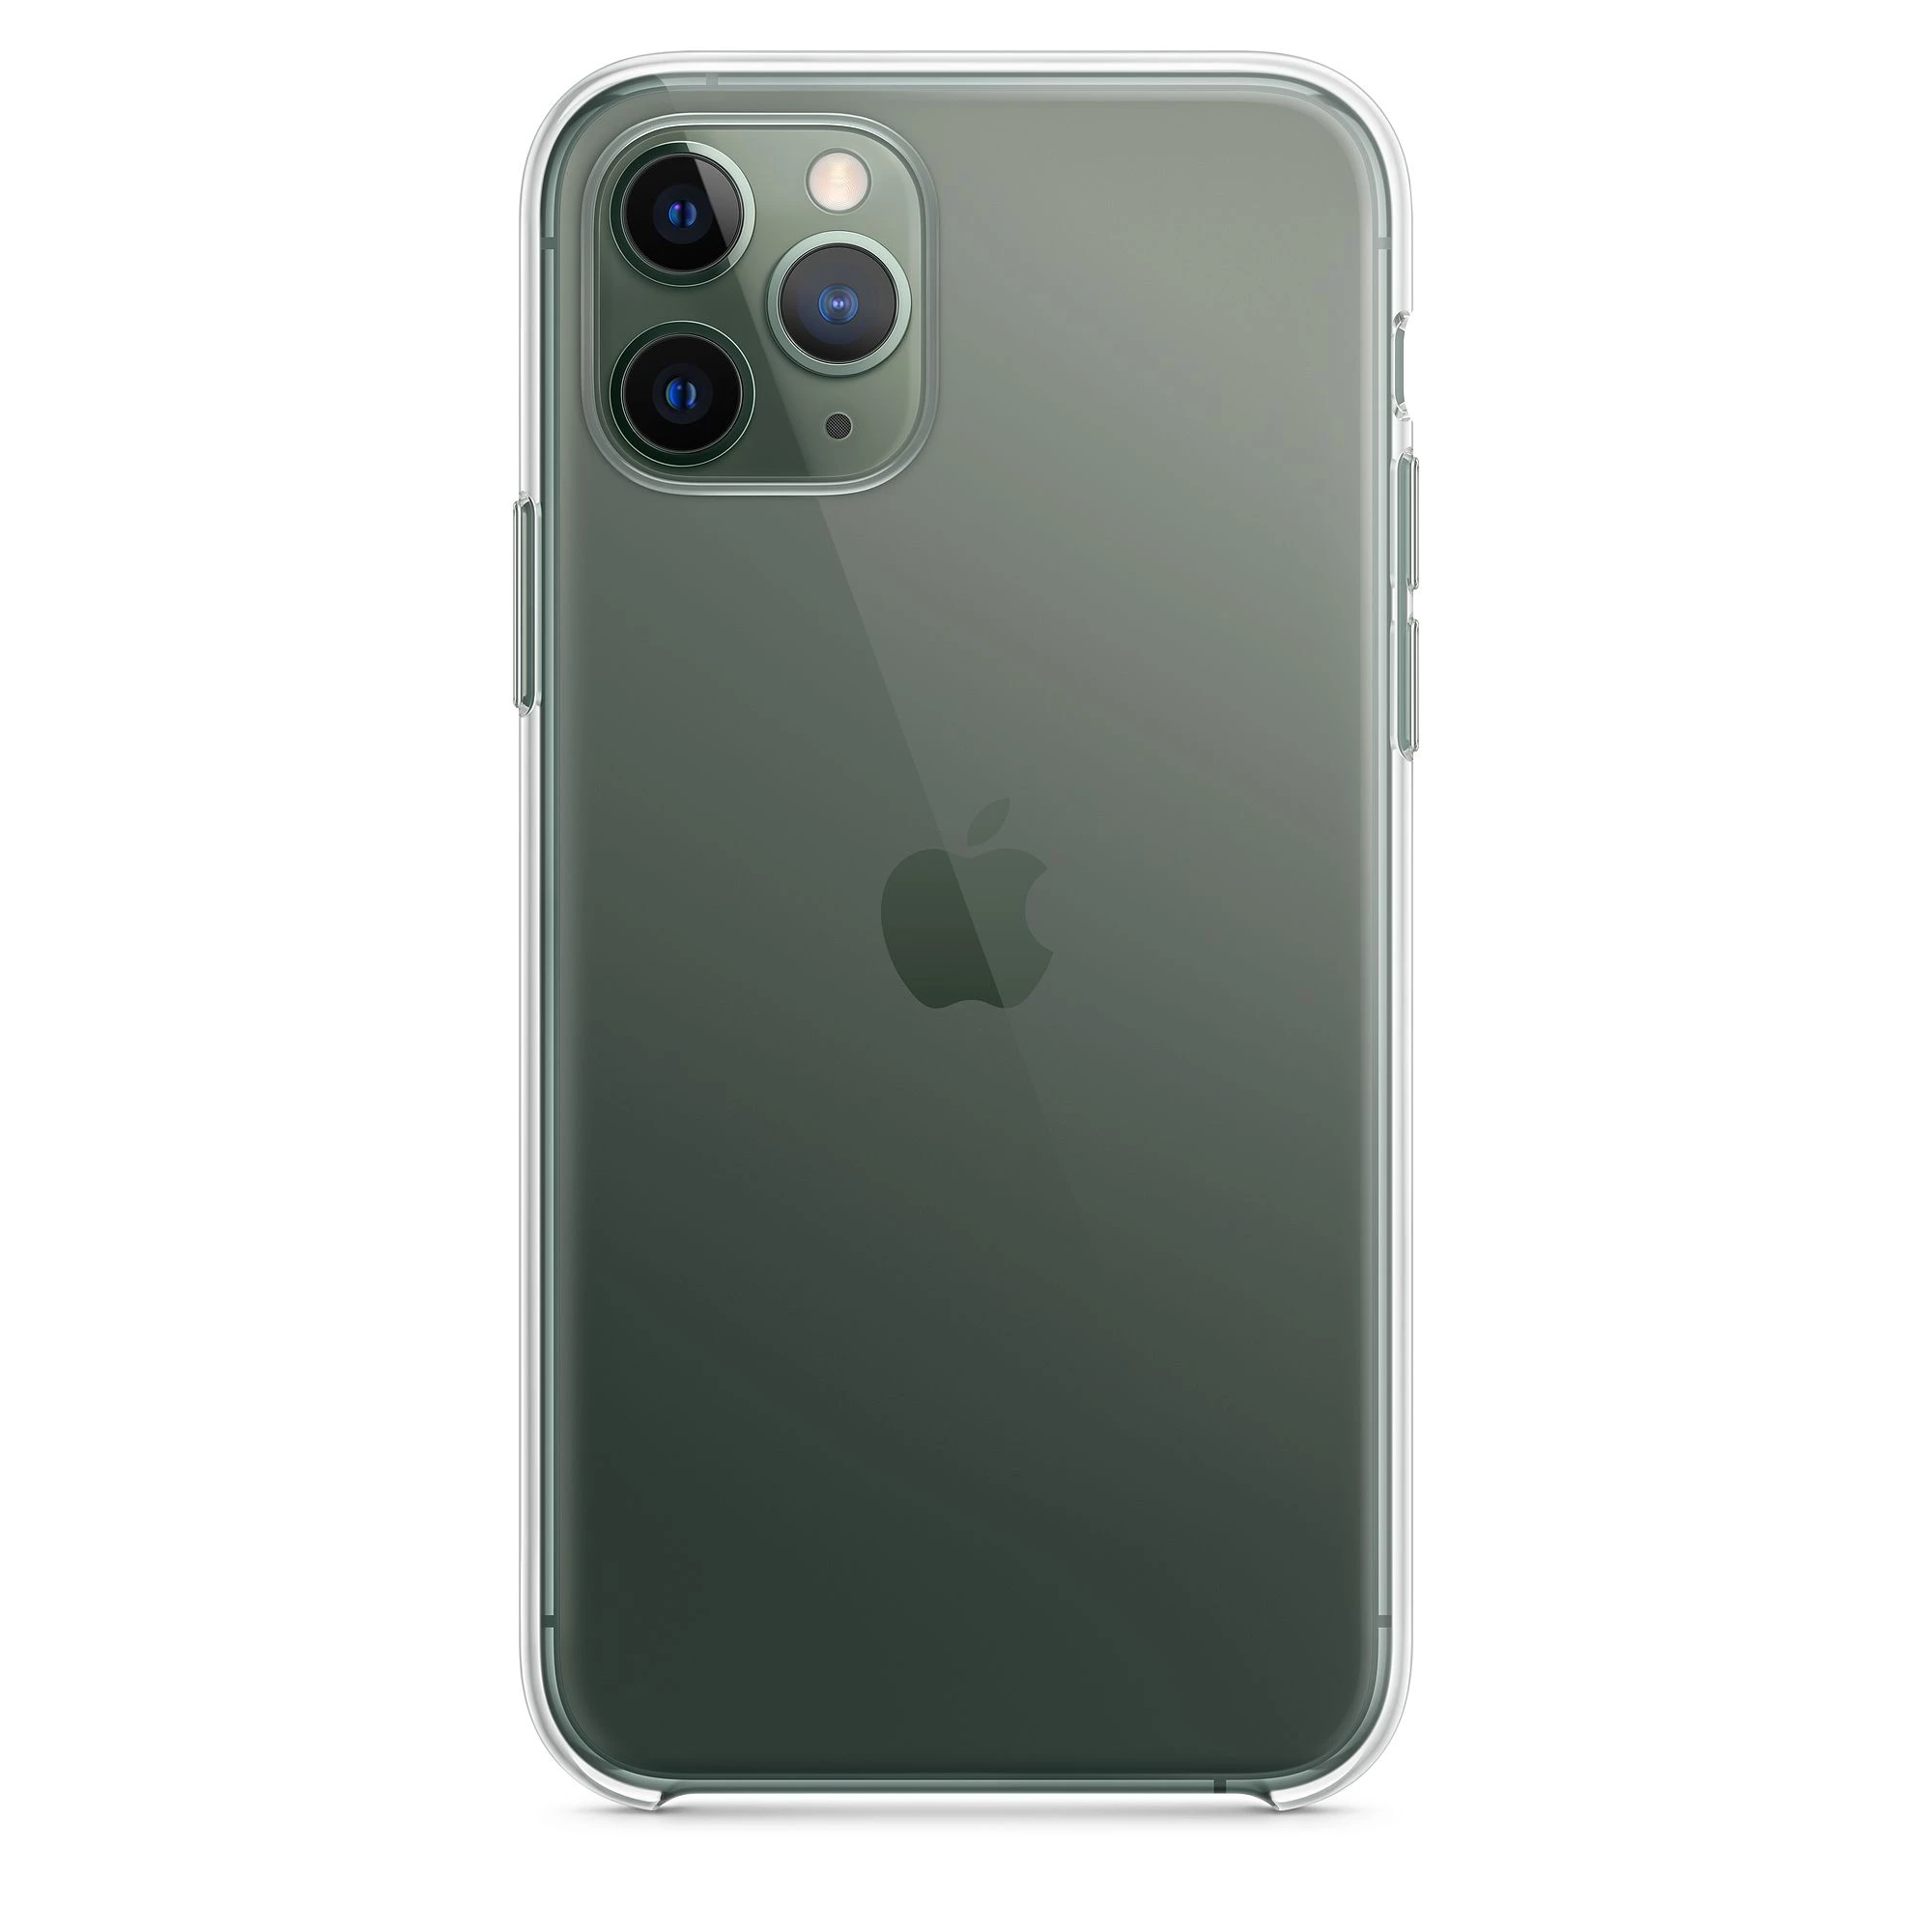 Apple iPhone 11 Pro Max Silicone Case LUX COPY - Clear (MXOH2)